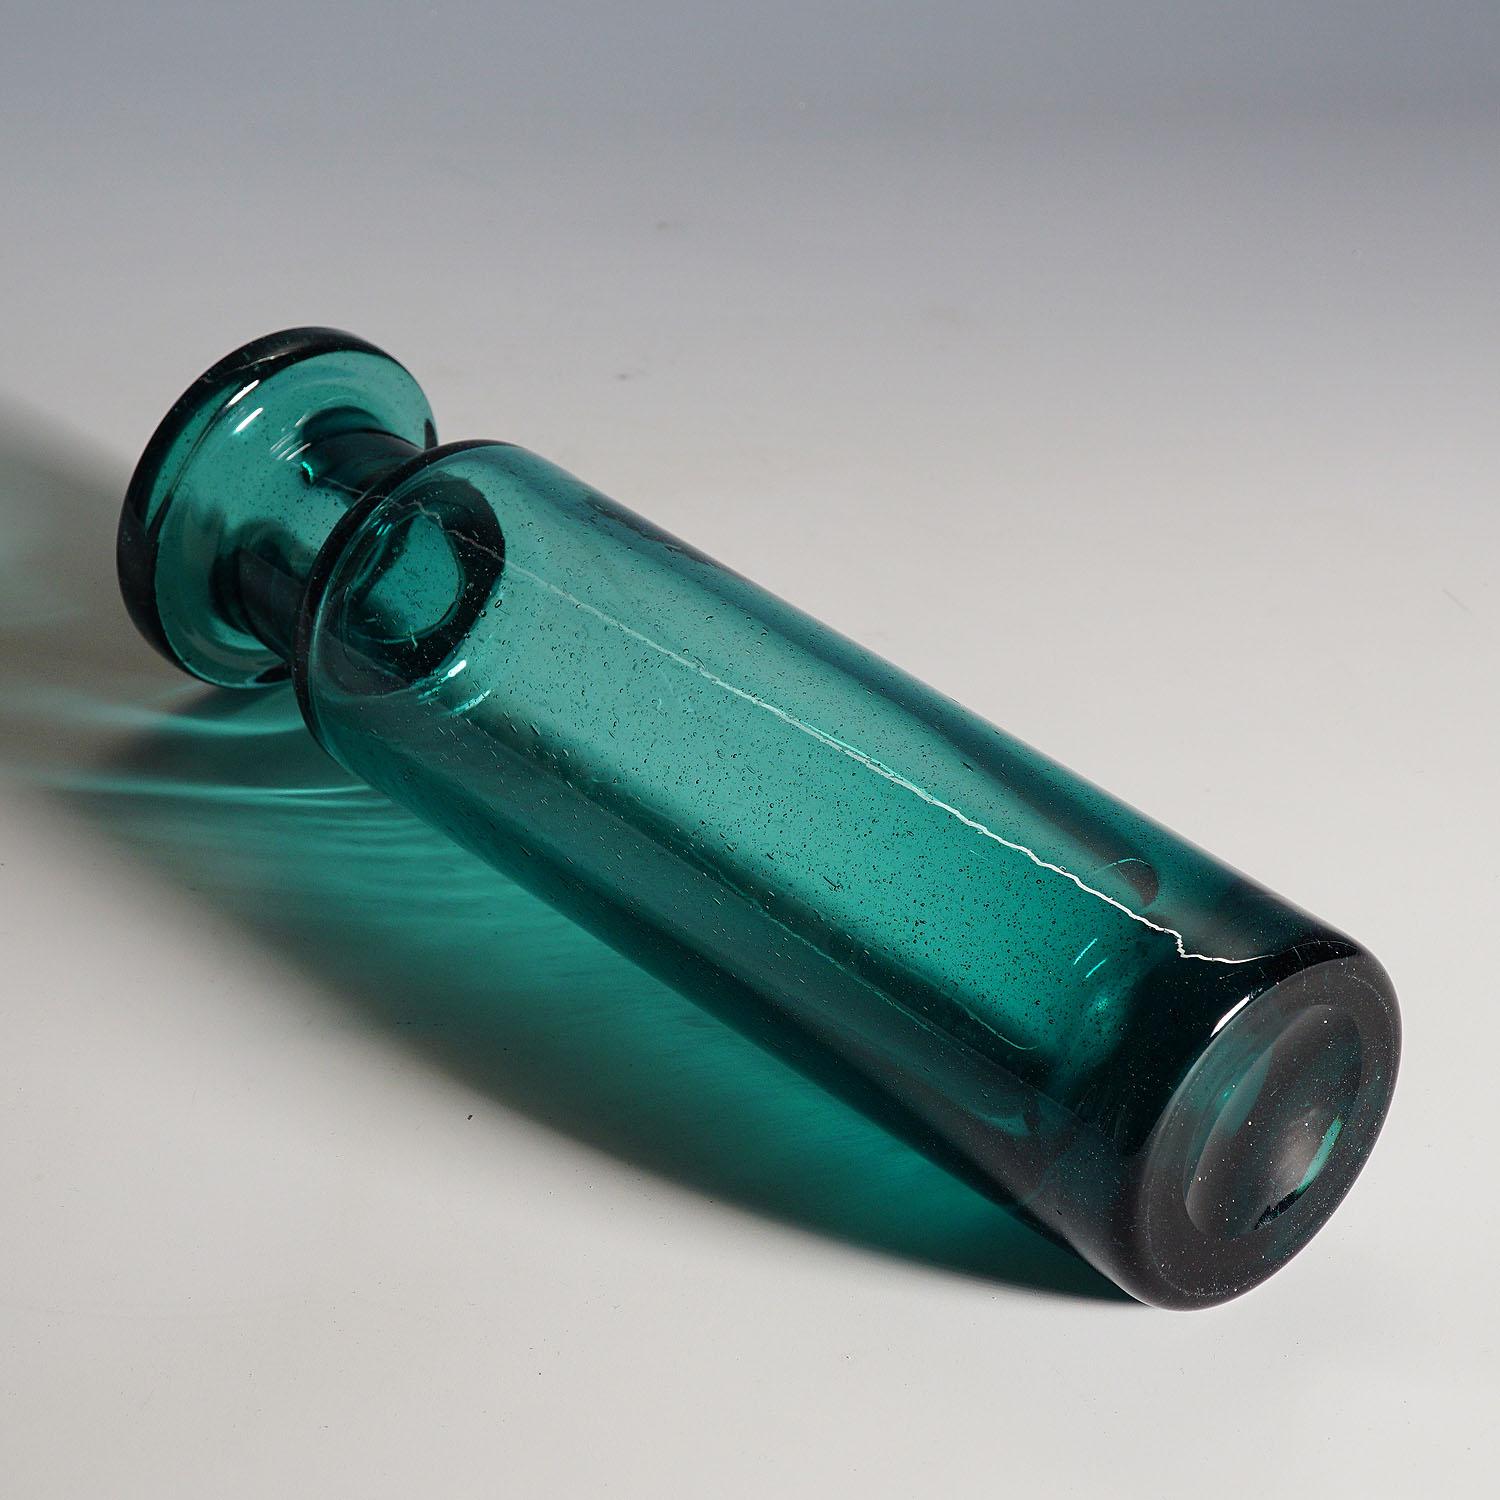 20th Century Vintage Petrol Colored Glass Vase by Ichendorfer Glassworks, ca. 1960s For Sale